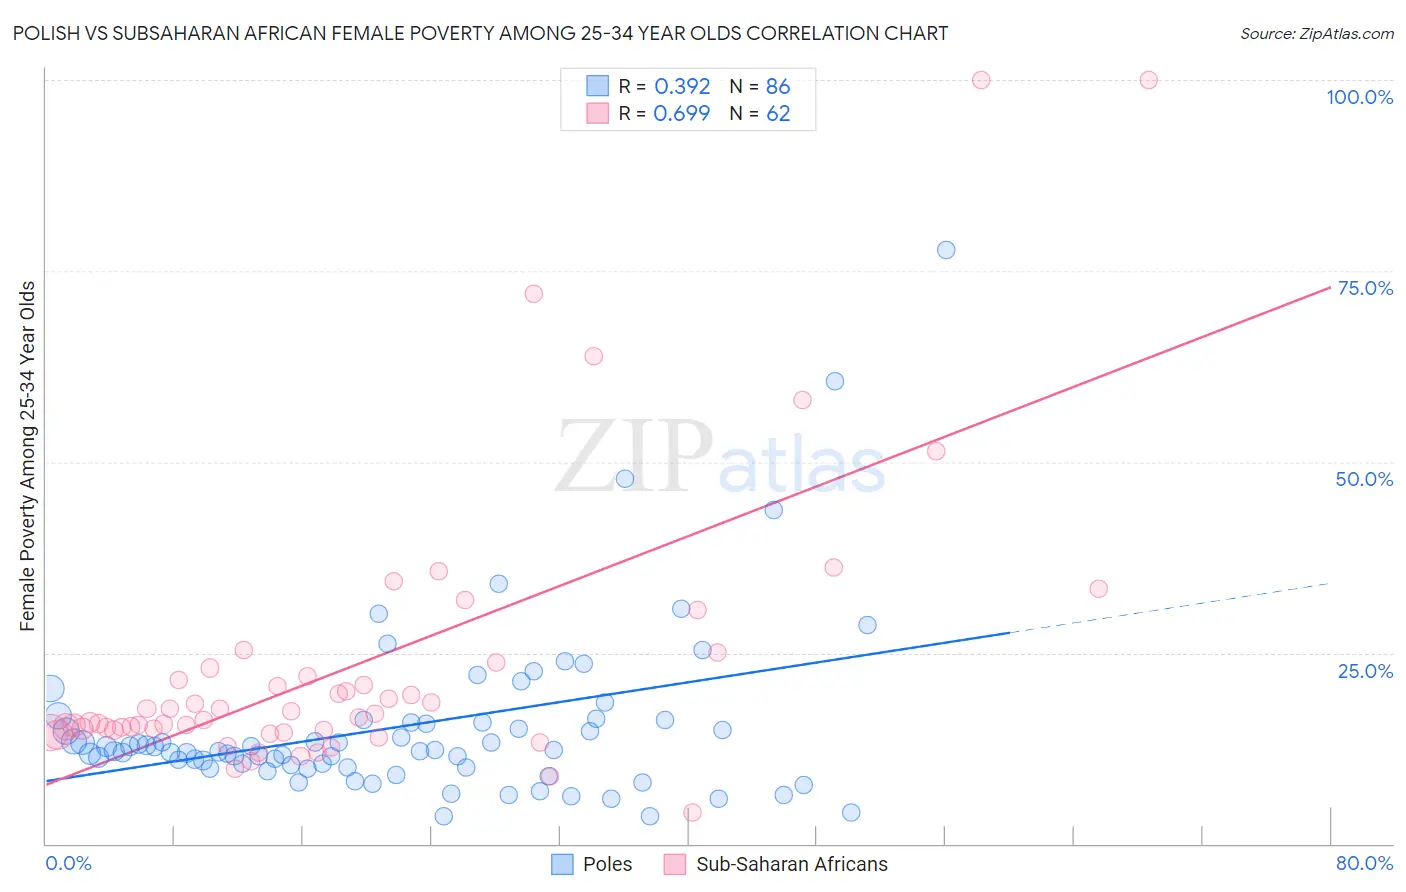 Polish vs Subsaharan African Female Poverty Among 25-34 Year Olds